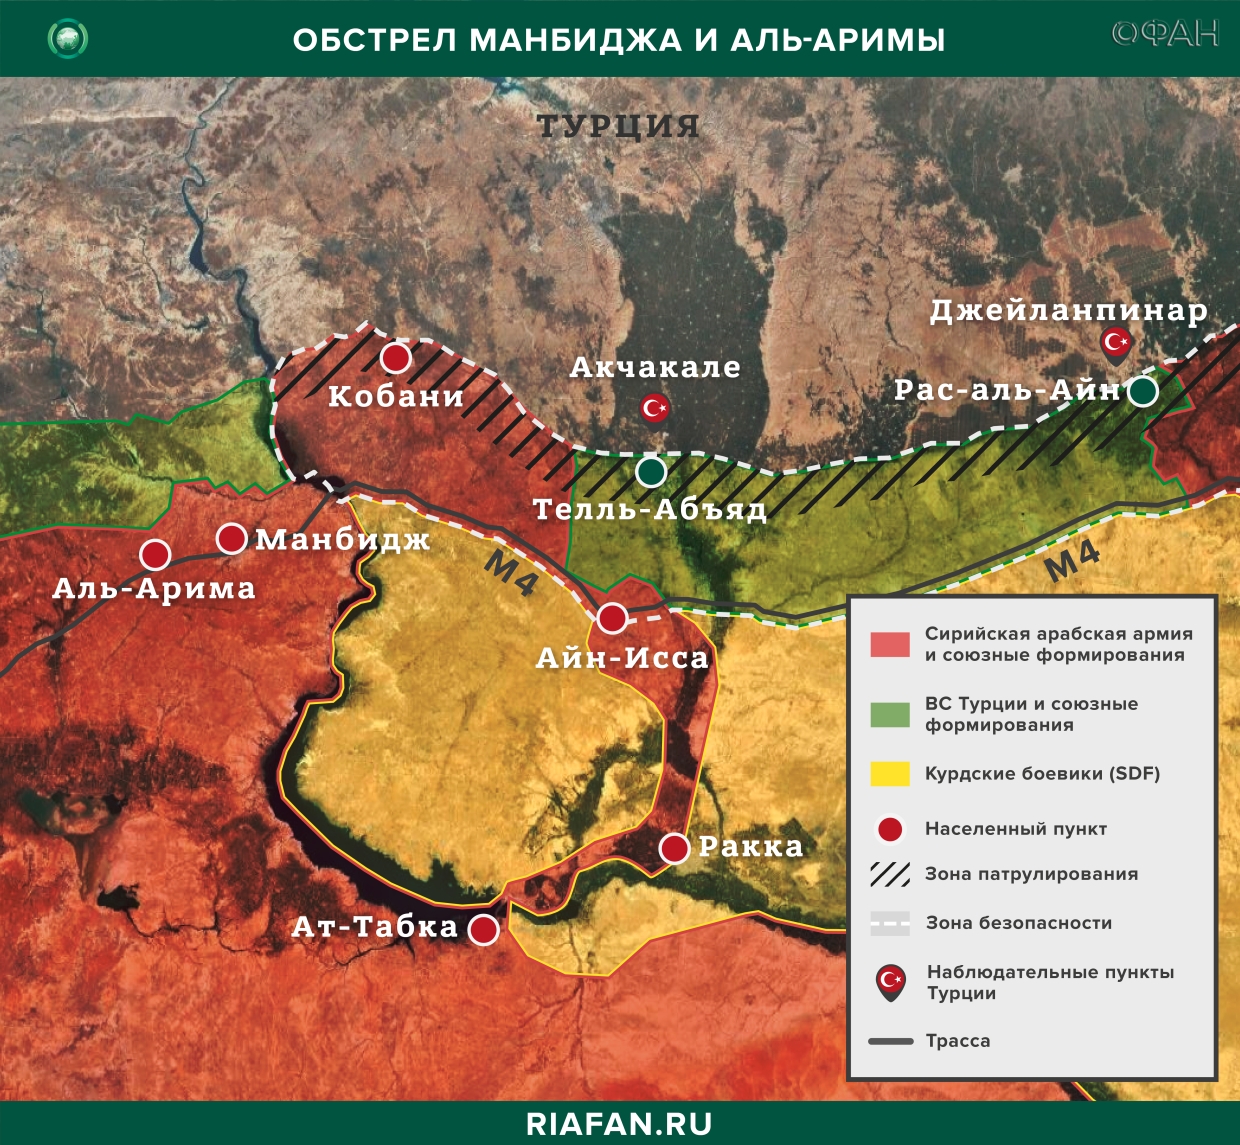 Syrian digest: a summary of the events in Syria for 2 March of 22.00